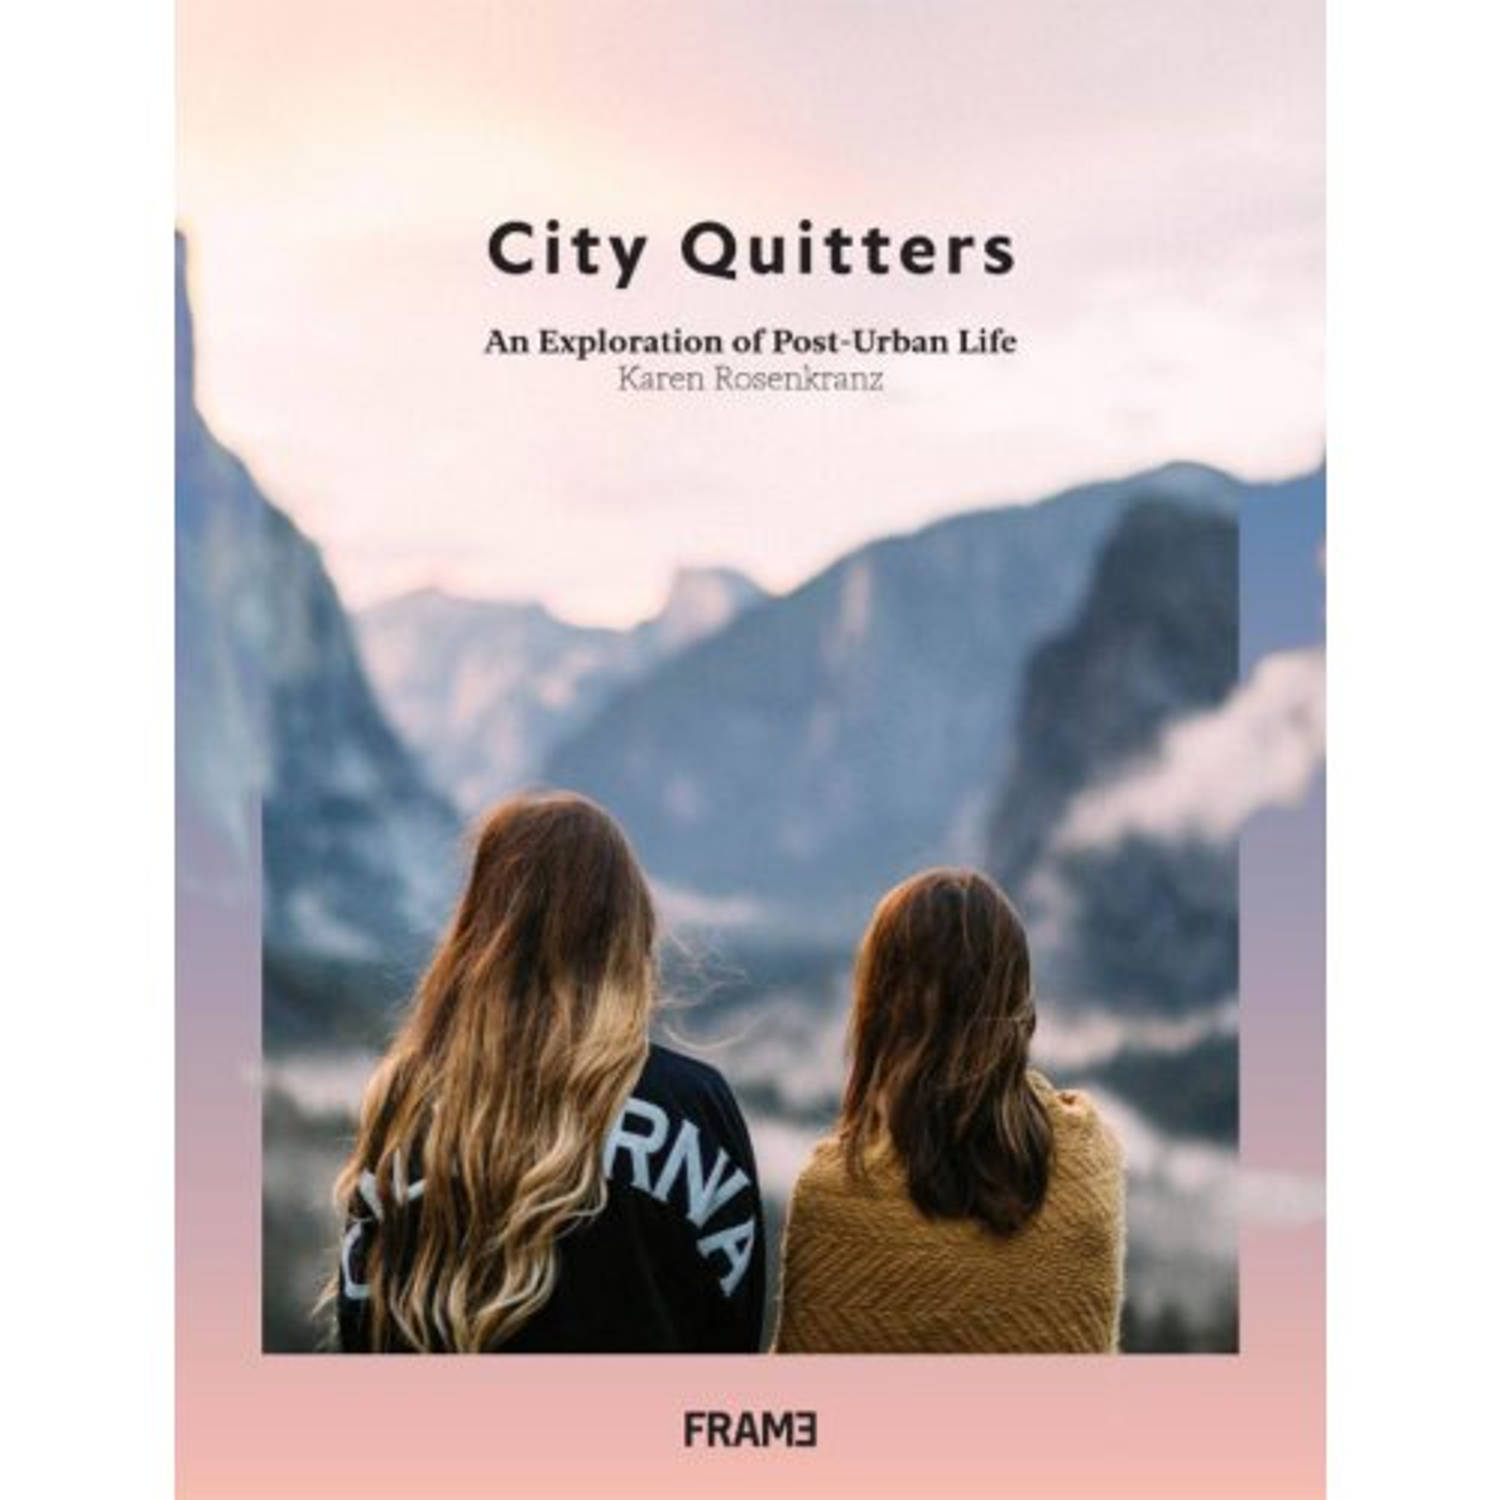 City Quitters